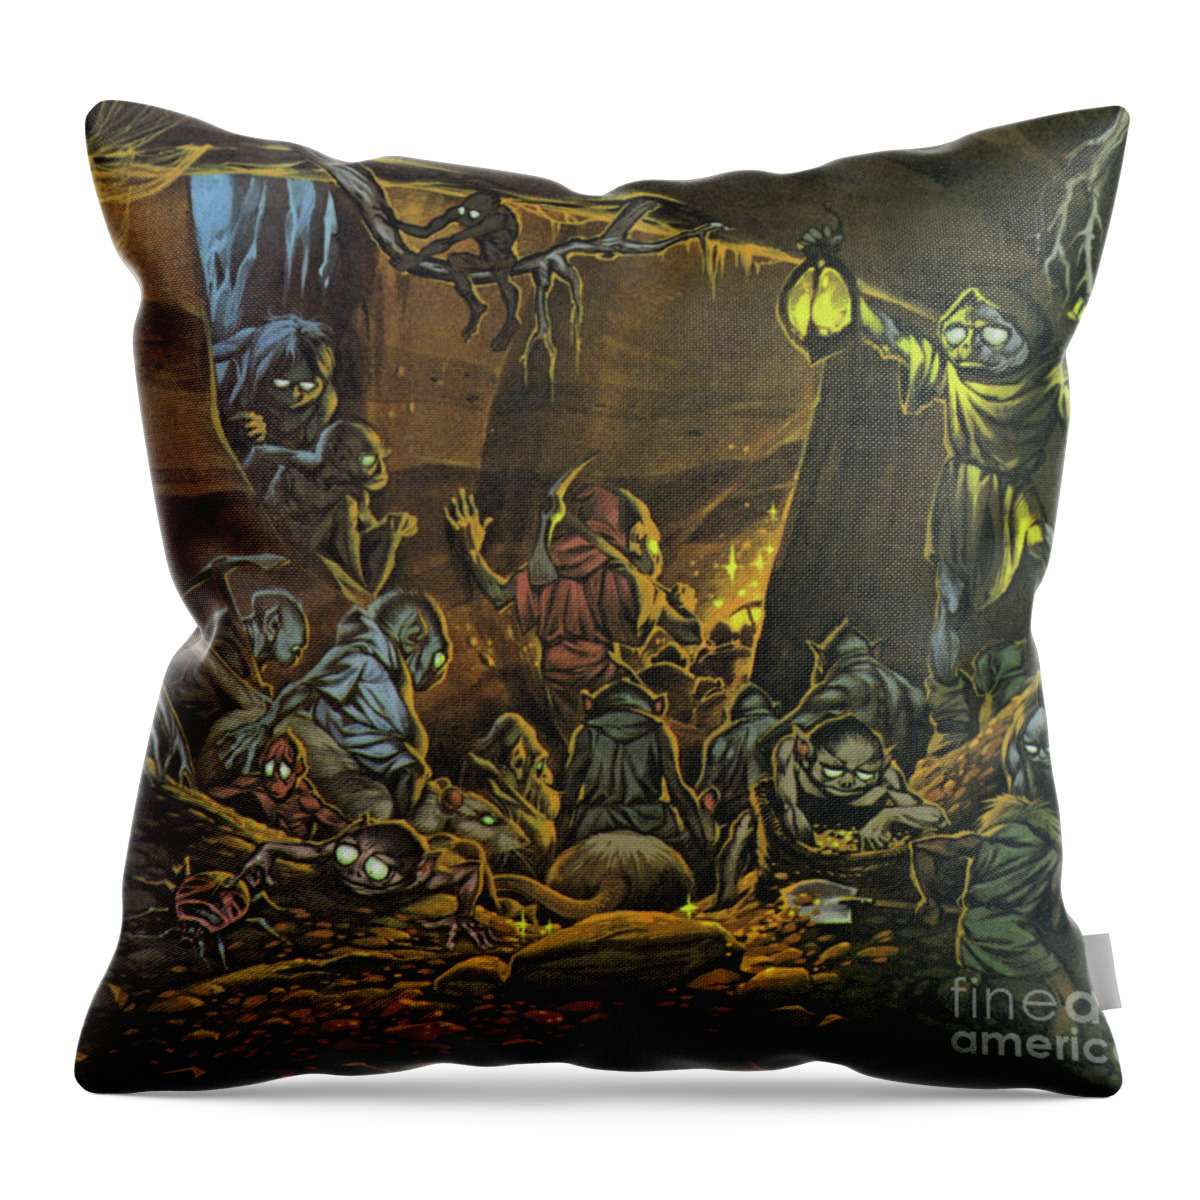 Myth Throw Pillow featuring the painting Gnomes by Angus McBride